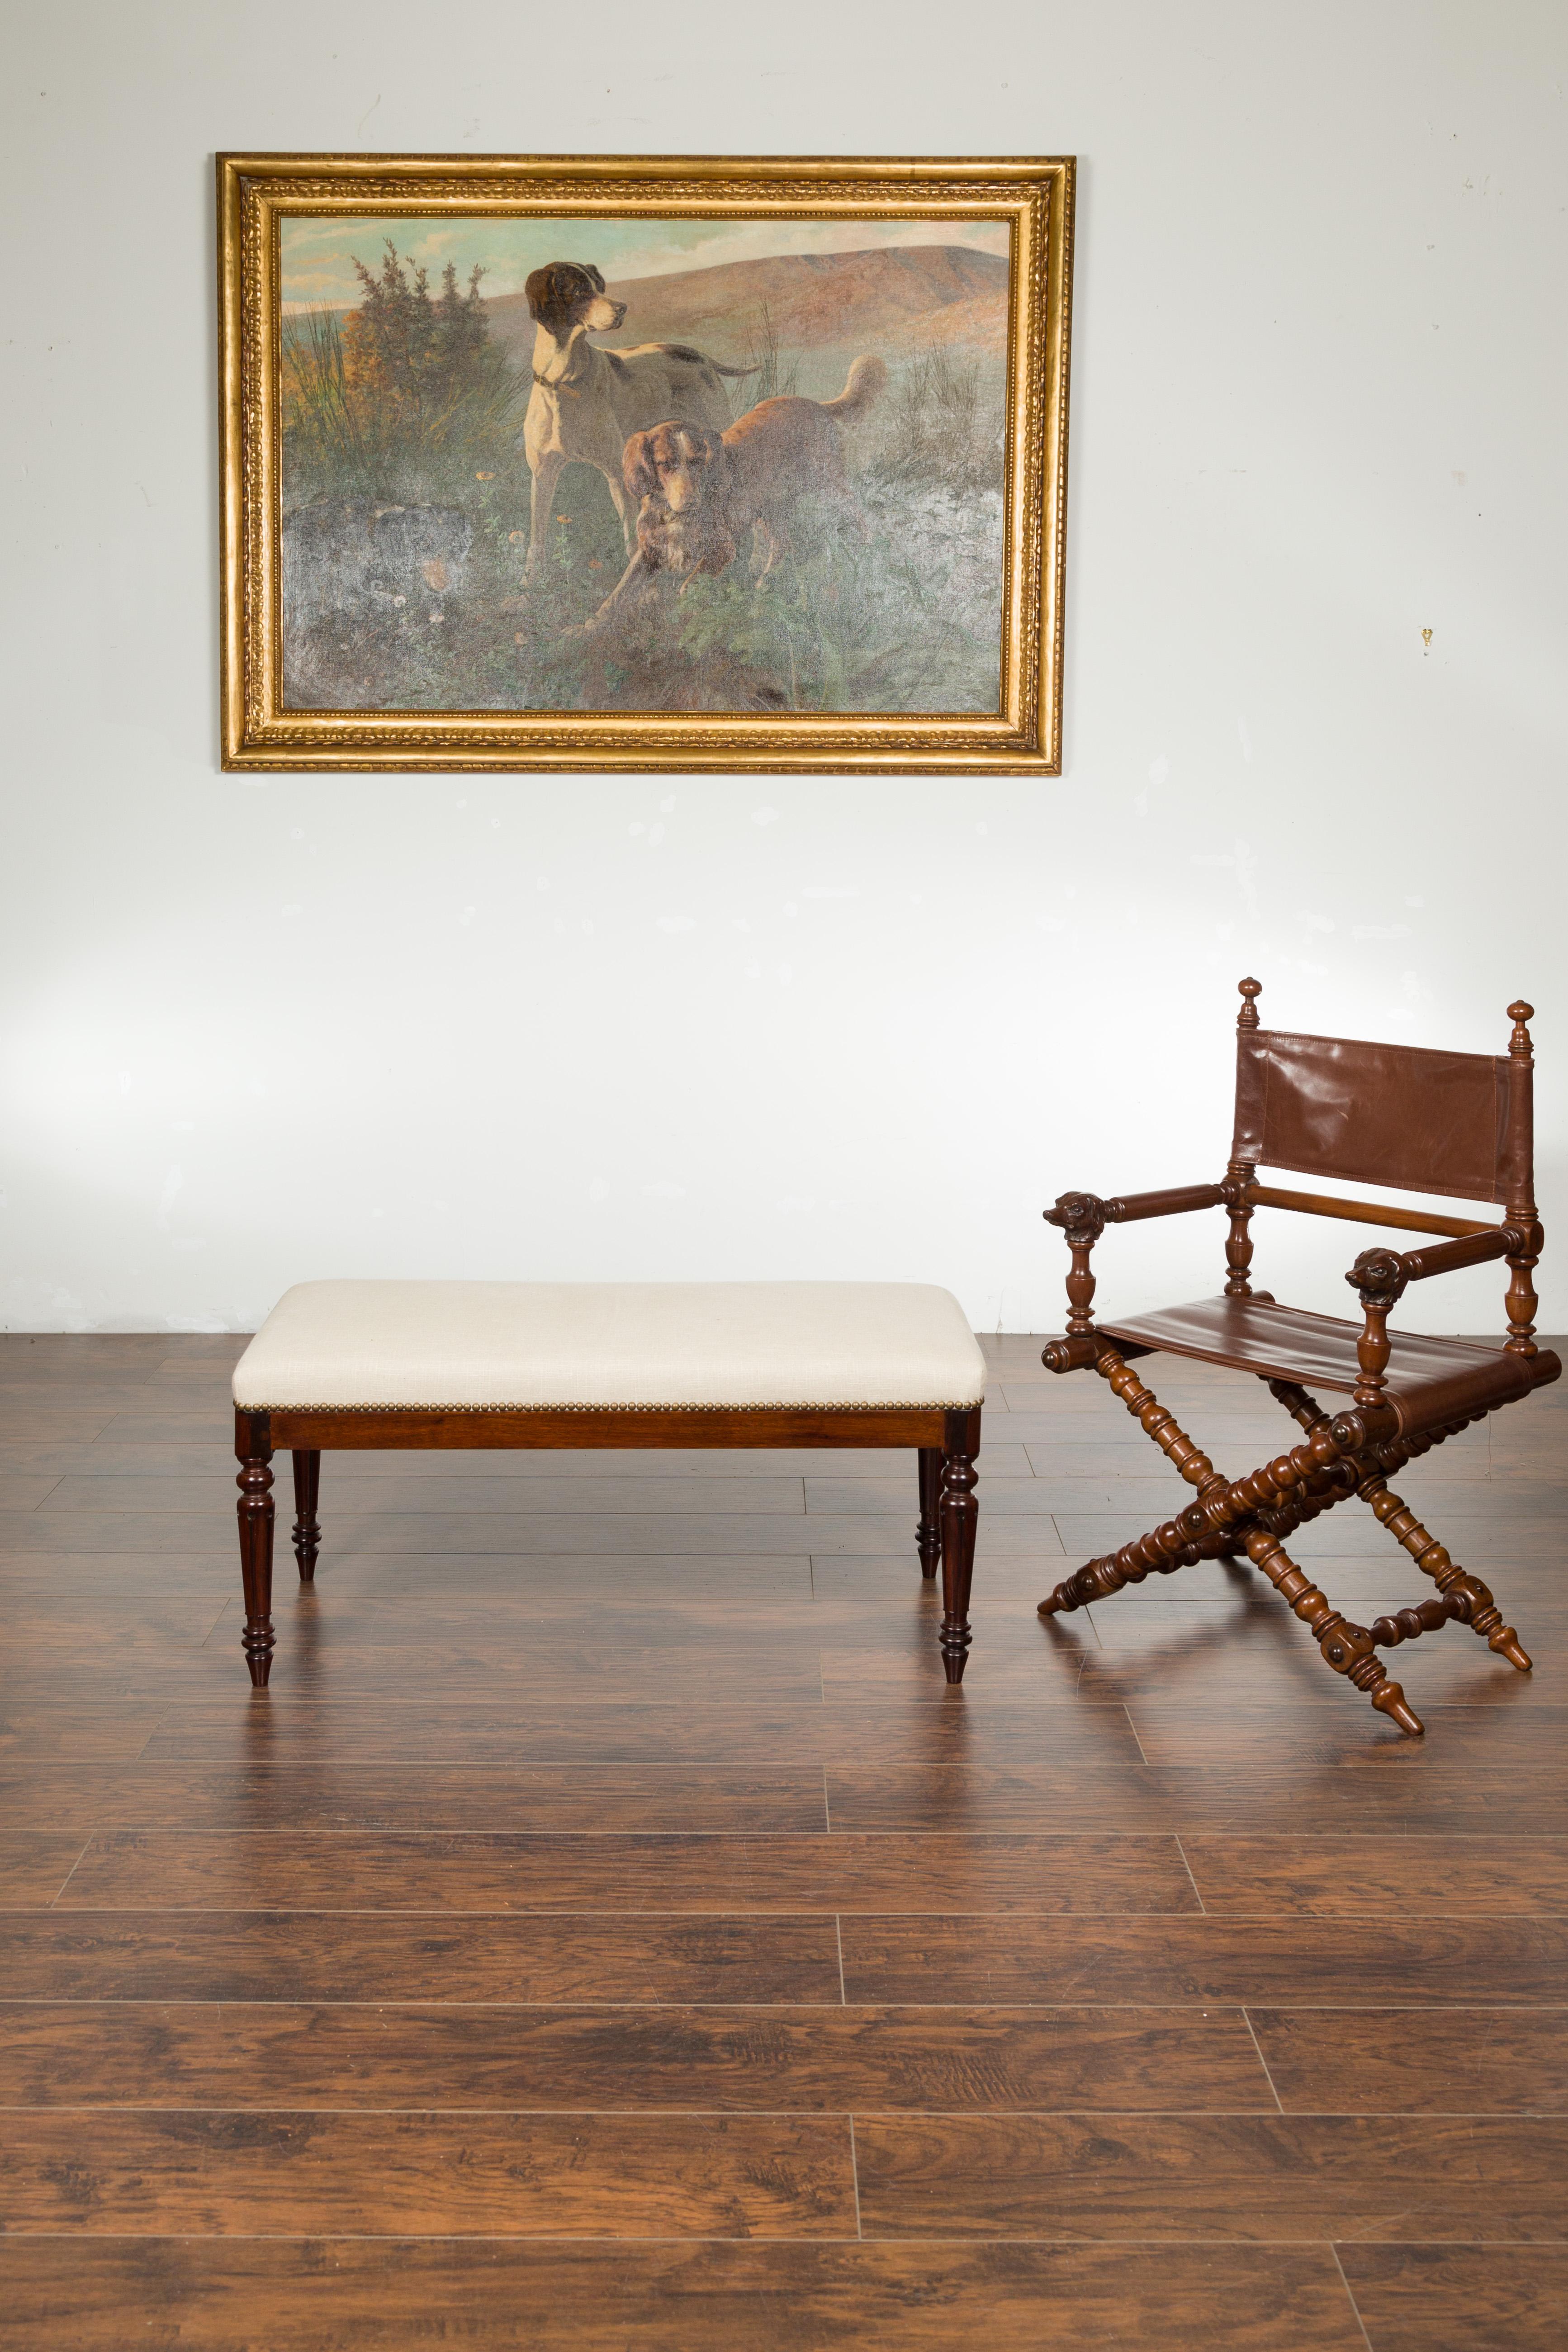 An English Georgian period rosewood bench from the early 19th century, with new upholstery and brass nailhead trim. Created in England during the first quarter of the 19th century, this Georgian rosewood bench features a rectangular seat, newly